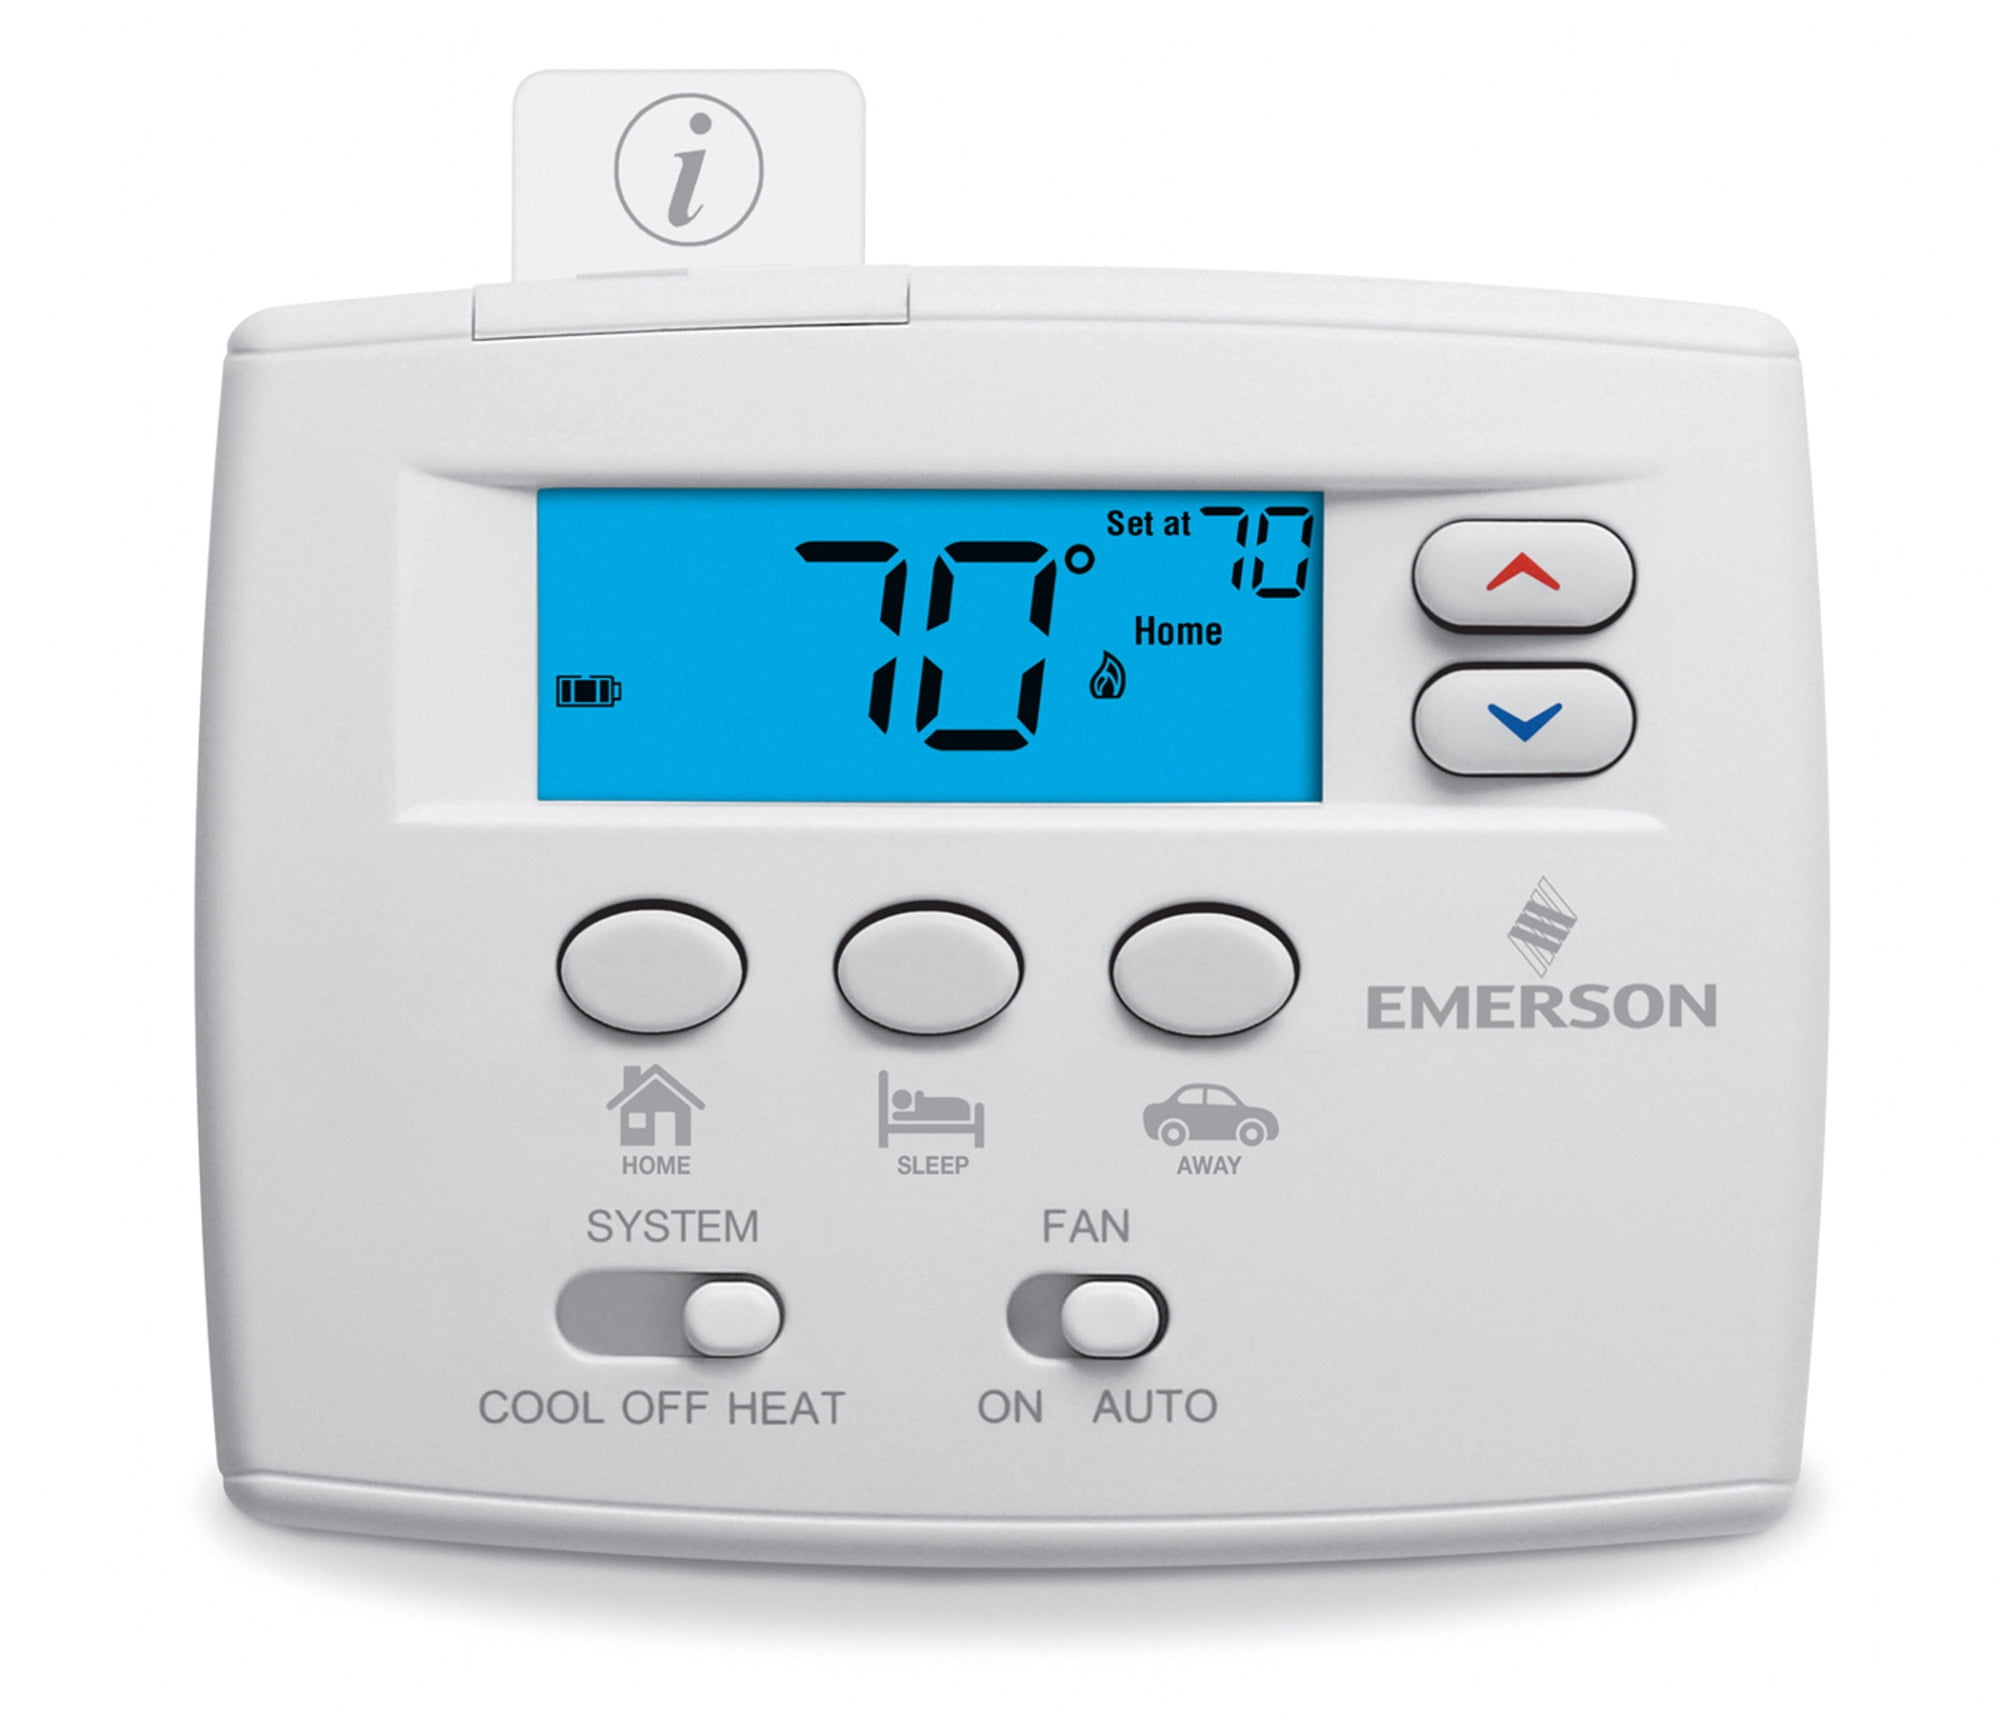 emerson-1f86ez-0251-blue-series-2-thermostats-1-h-1-c-hardwired